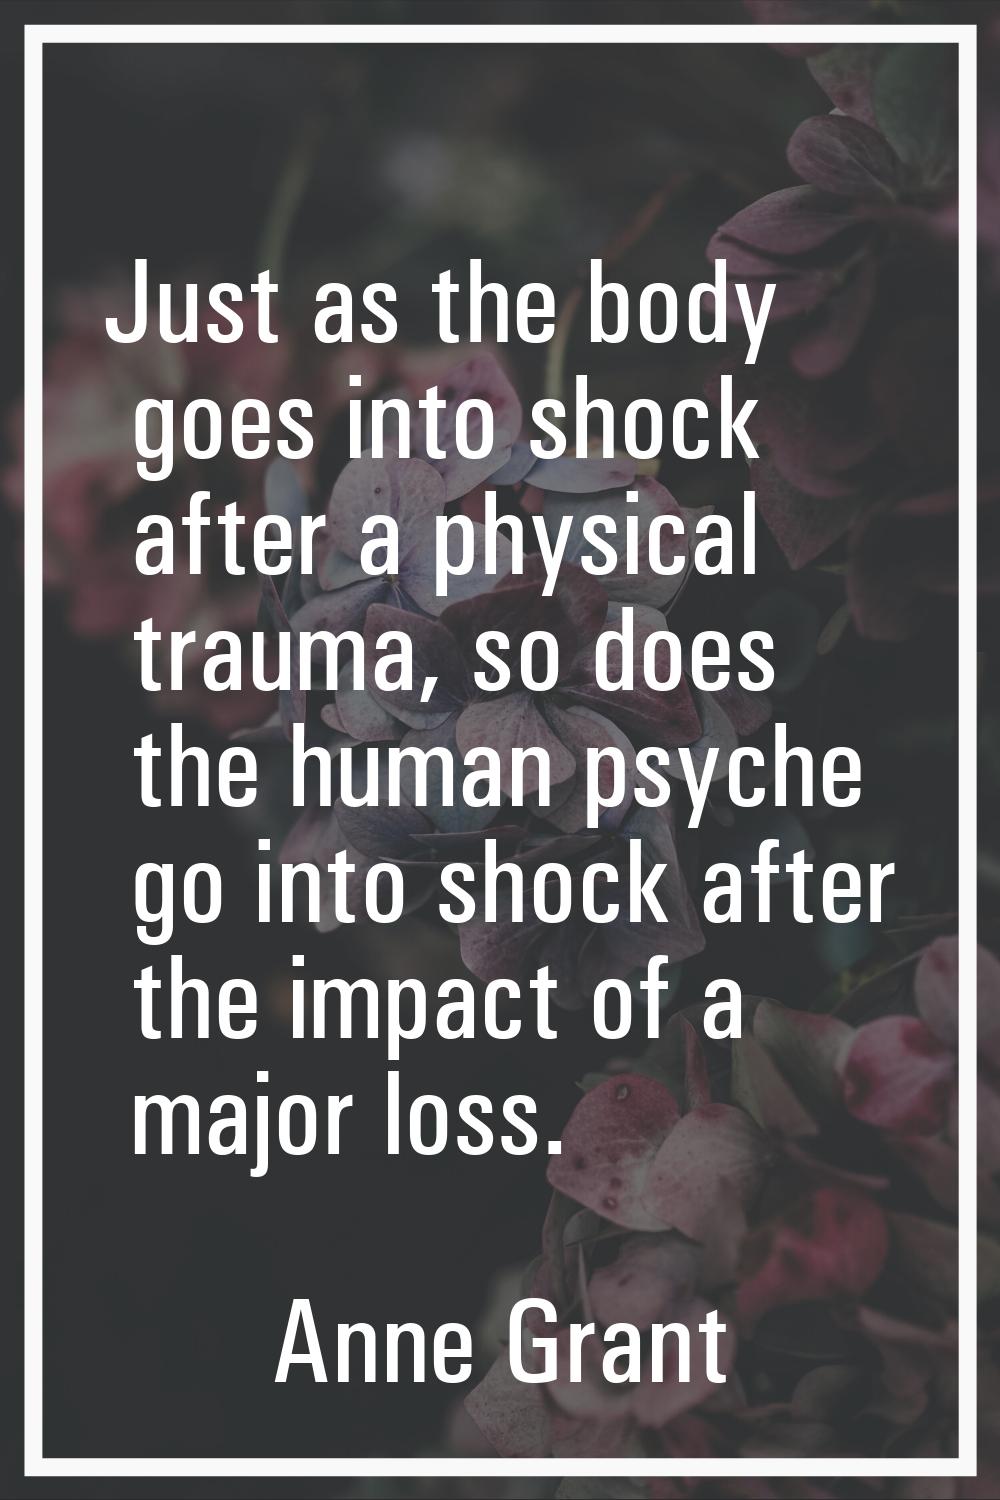 Just as the body goes into shock after a physical trauma, so does the human psyche go into shock af